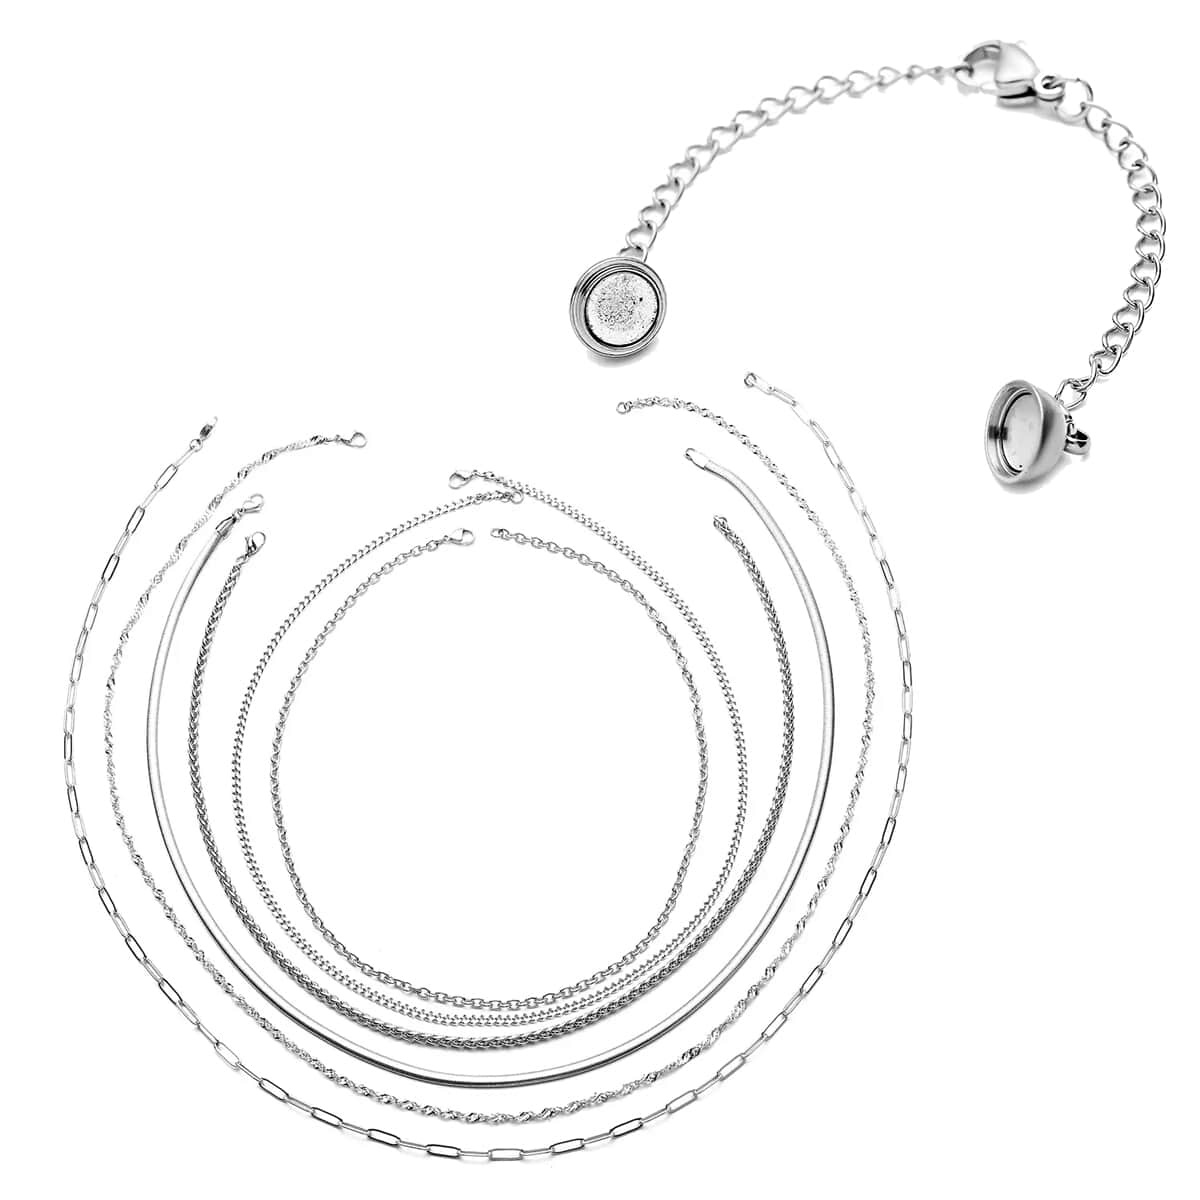 EVER TRUE 18Kt White Gold Plated 15 Piece Necklace, Bracelet, Earrings and Extender Set in Stainless Steel with Velvet Travel Organizer image number 6